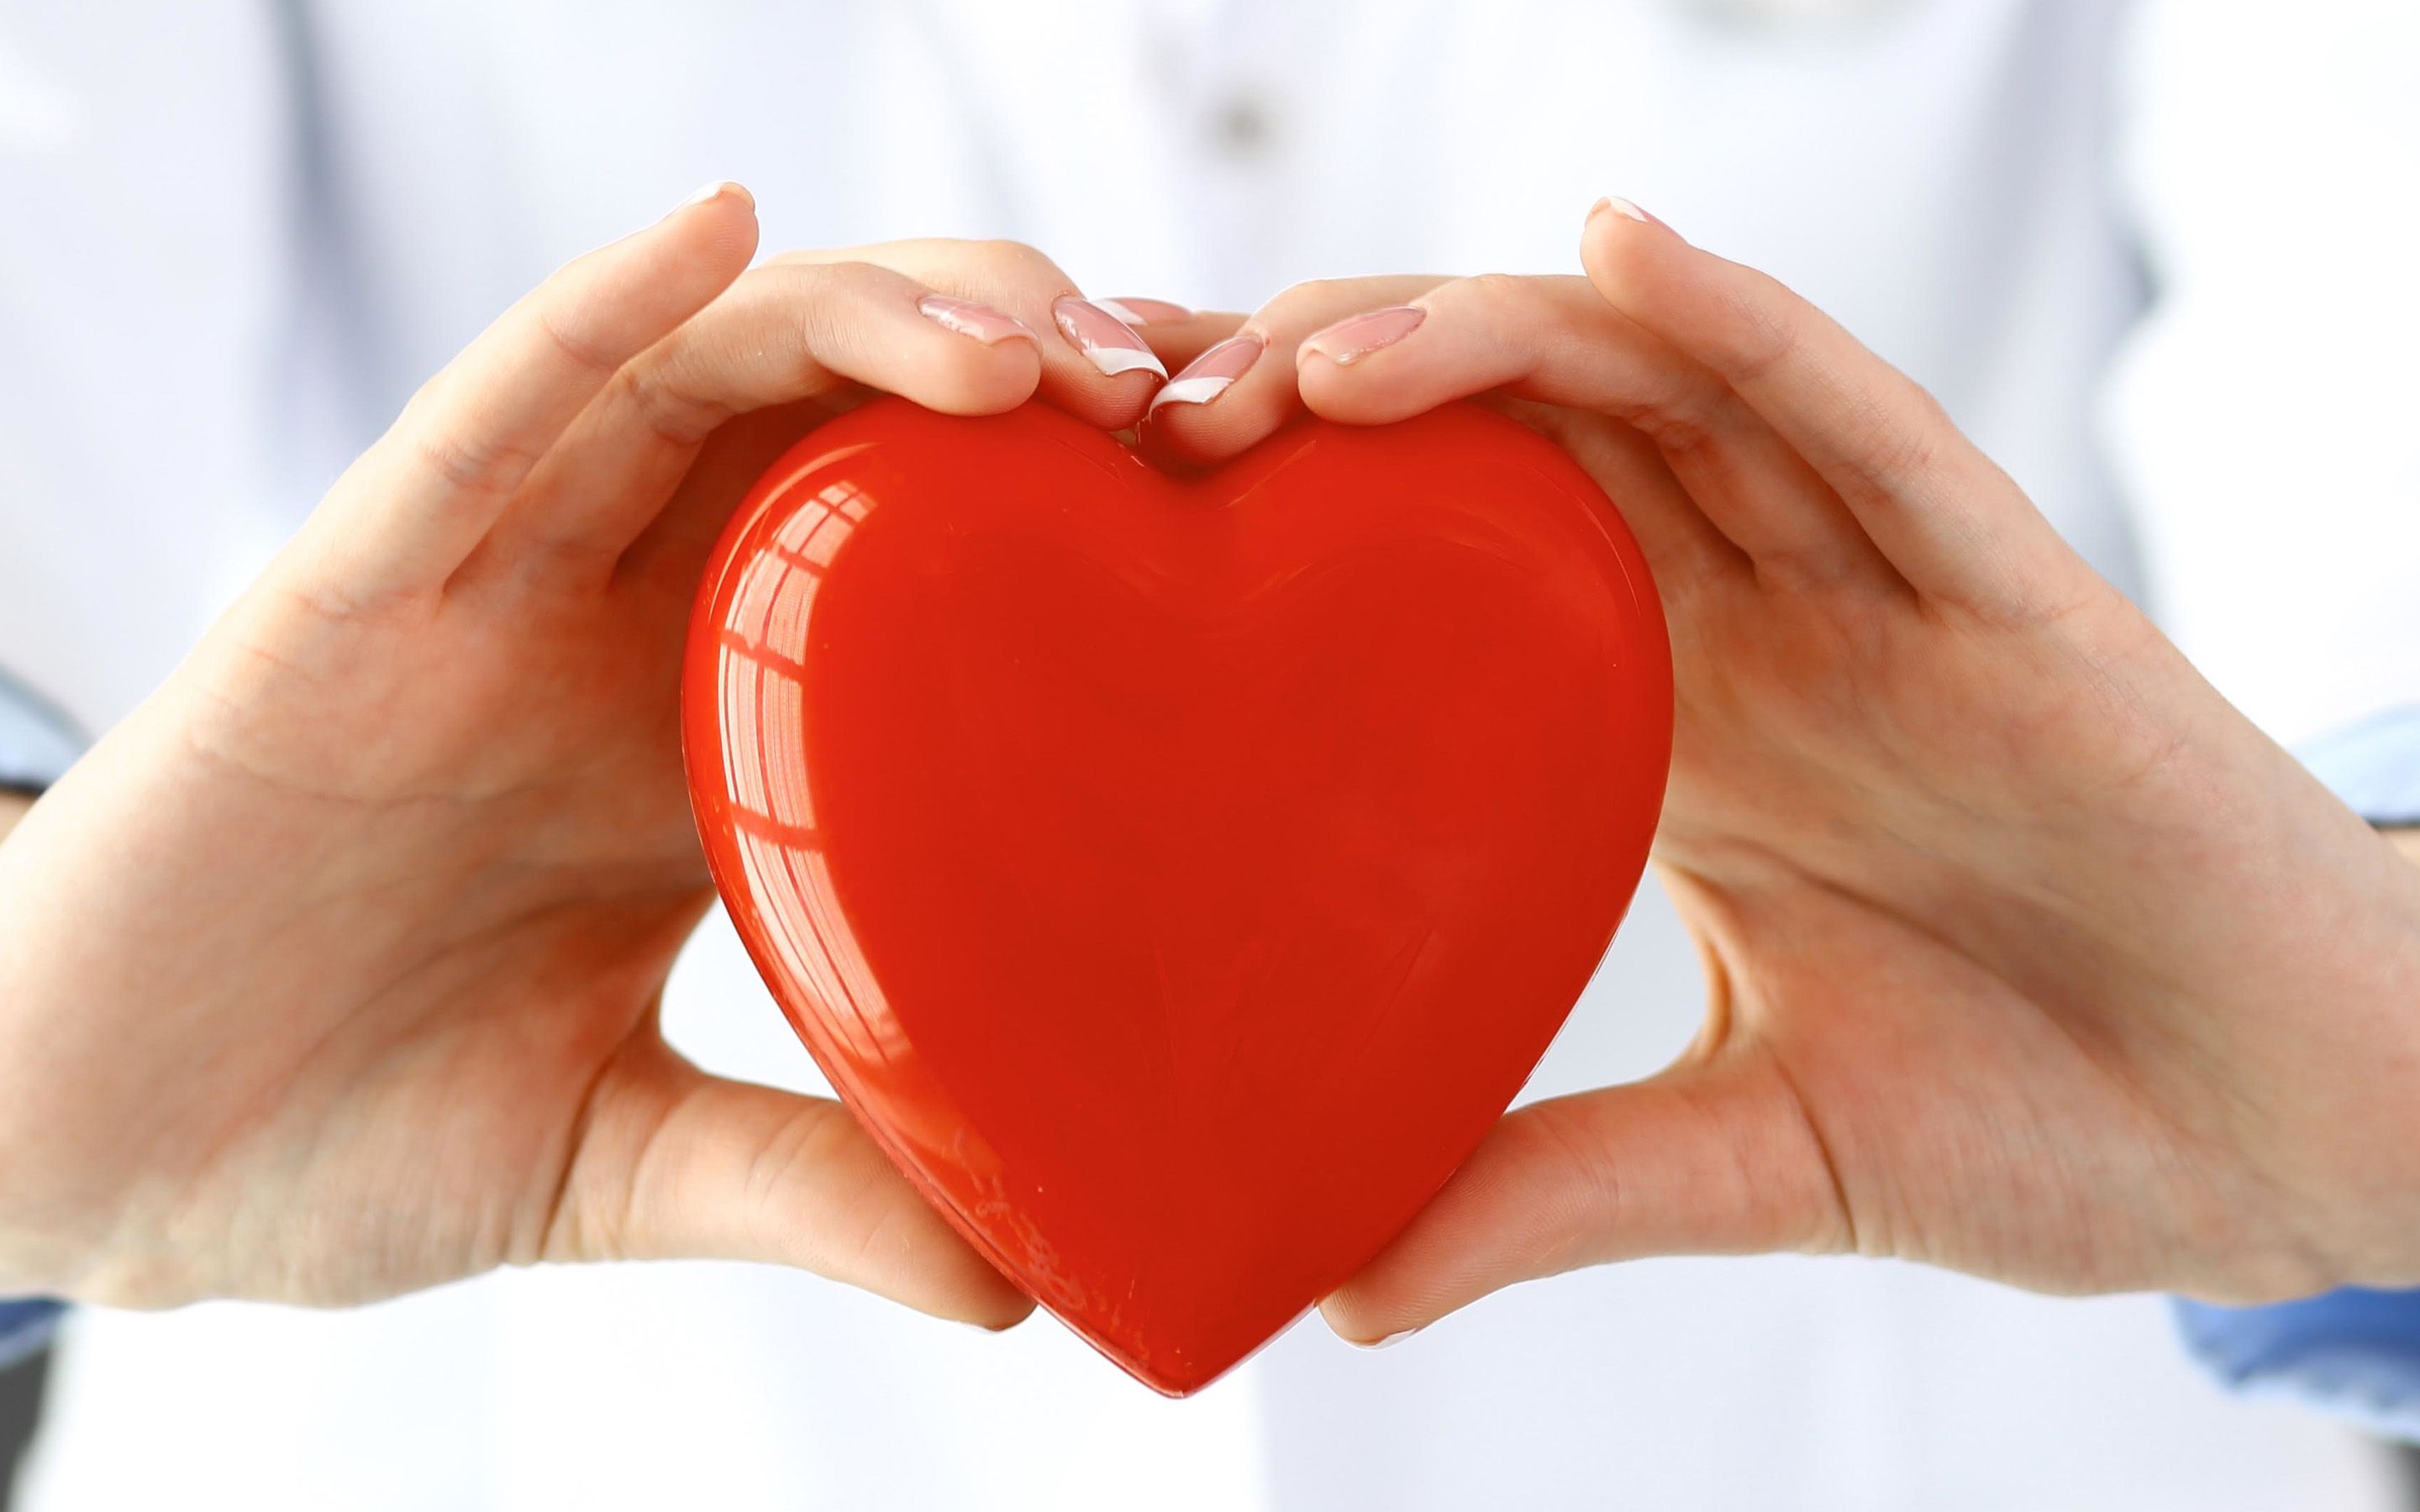 Download wallpaper red heart in hands, cardiology, doctor with a heart in his hands, cardiologist, doctor, healthy heart concepts, medicine concepts for desktop with resolution 2880x1800. High Quality HD picture wallpaper